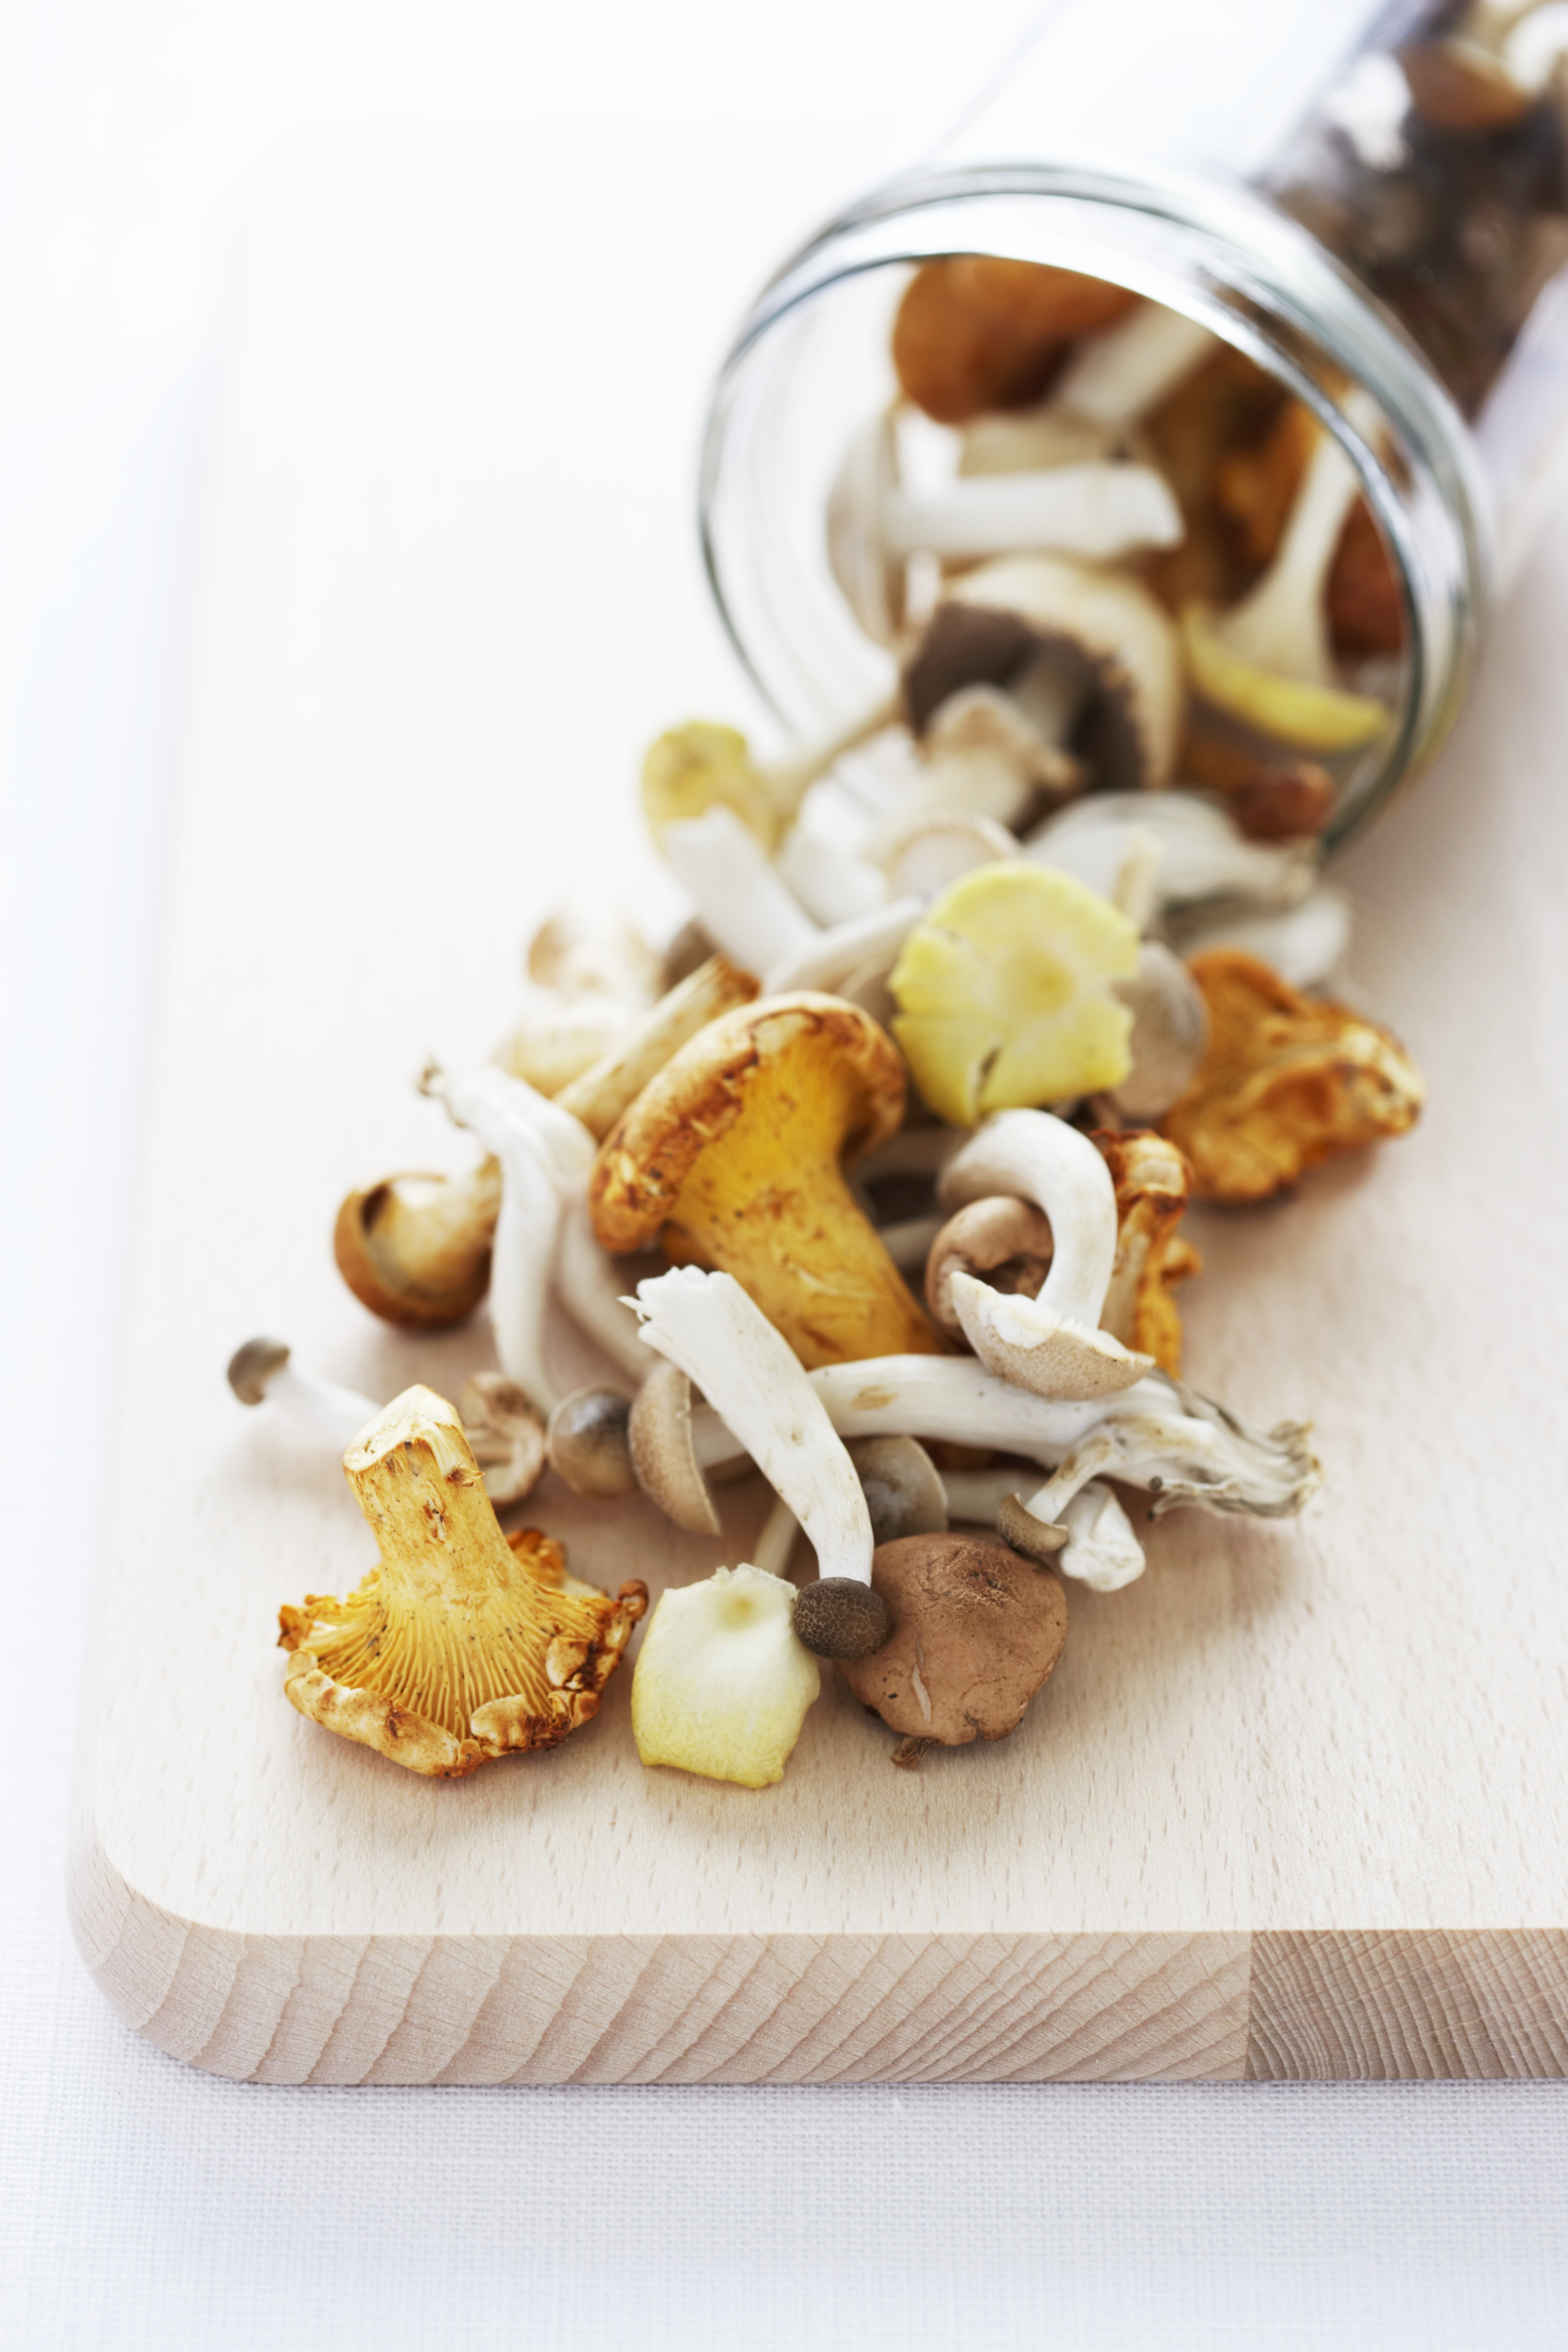 From Their Farm To Your Doorstep: Mushrooms